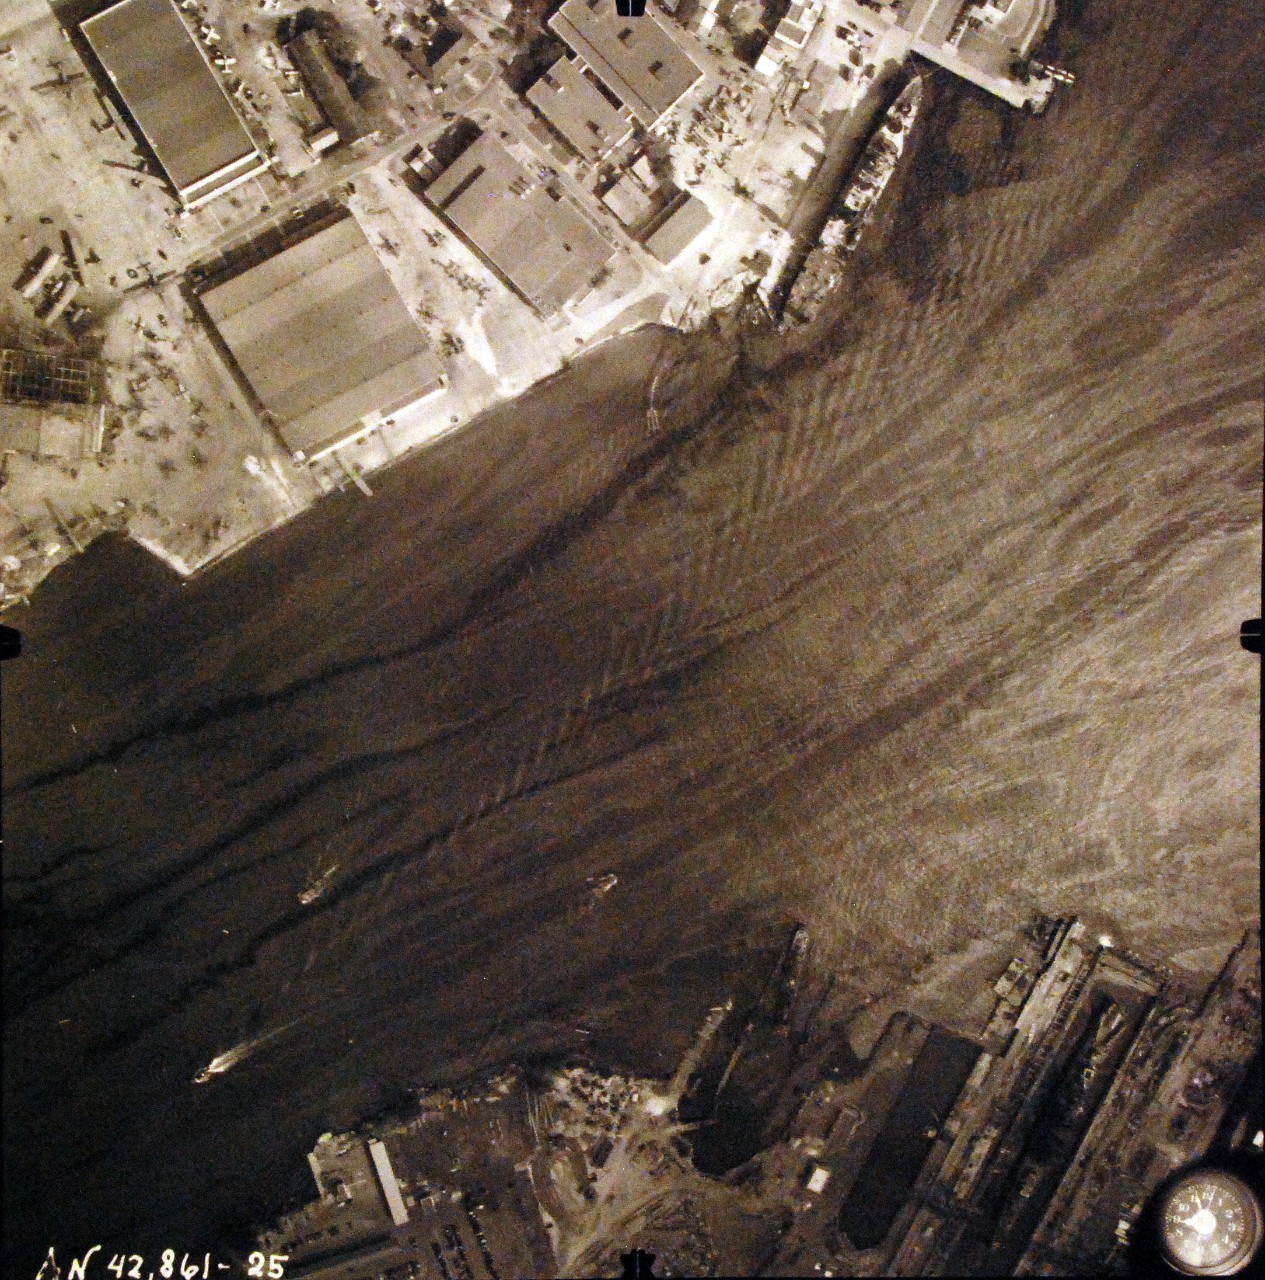 80-G-387586:  Pearl Harbor Attack, 7 December 1941.  Aerial view of "Battleship Row" moorings on the southern side of Ford Island, 10 December 1941, showing damage from the Japanese raid three days earlier.  Ship shown USS Curtiss (AV 4).  Note dark oil streaks on the harbor surface, originating from the sunken battleships. Photographed by VJ-1 at an altitude of 3,000 feet and released November 9, 1950. U.S. Navy photograph, now in the collections of the National Archives.     (9/22/2015).